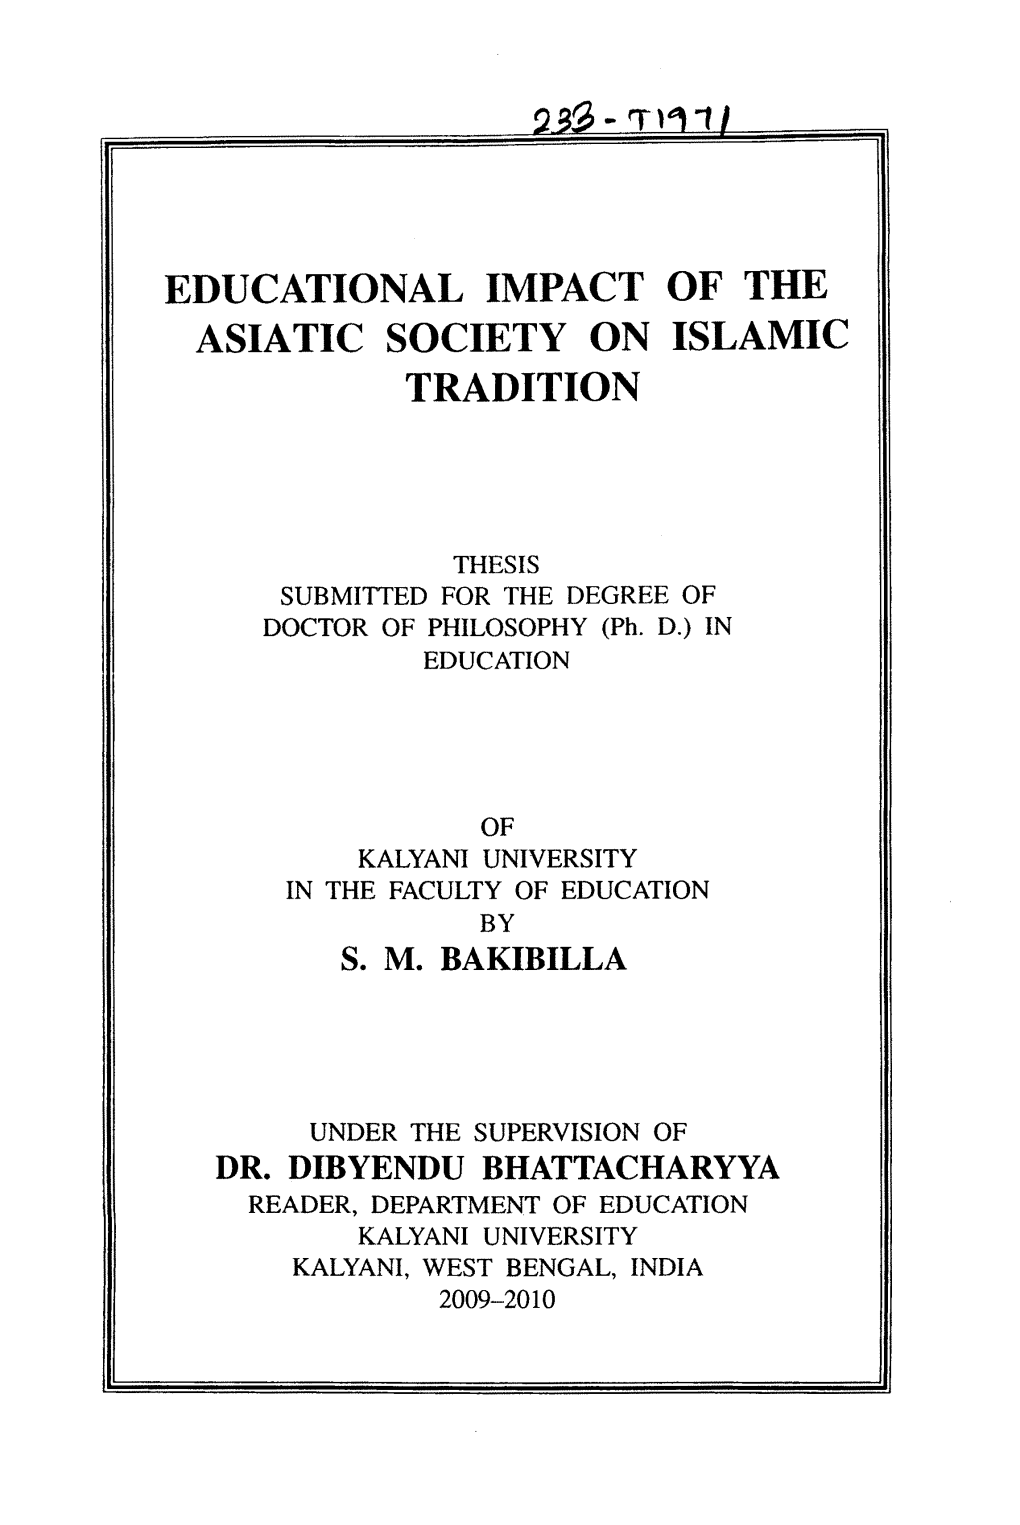 Educational Impact of the Asiatic Society on Islamic Tradition